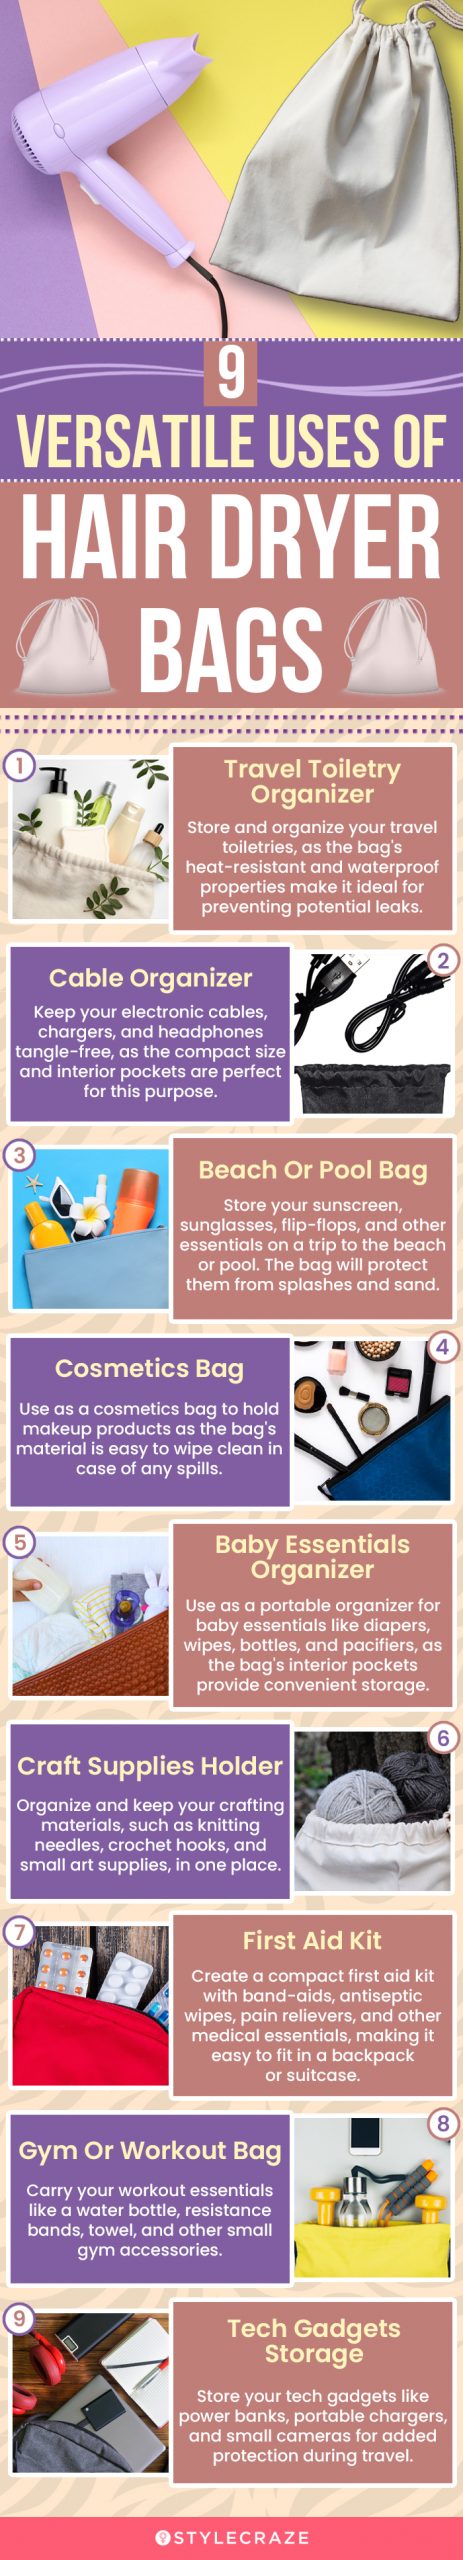 9 Versatile Uses Of Hair Dryer Bags (infographic)